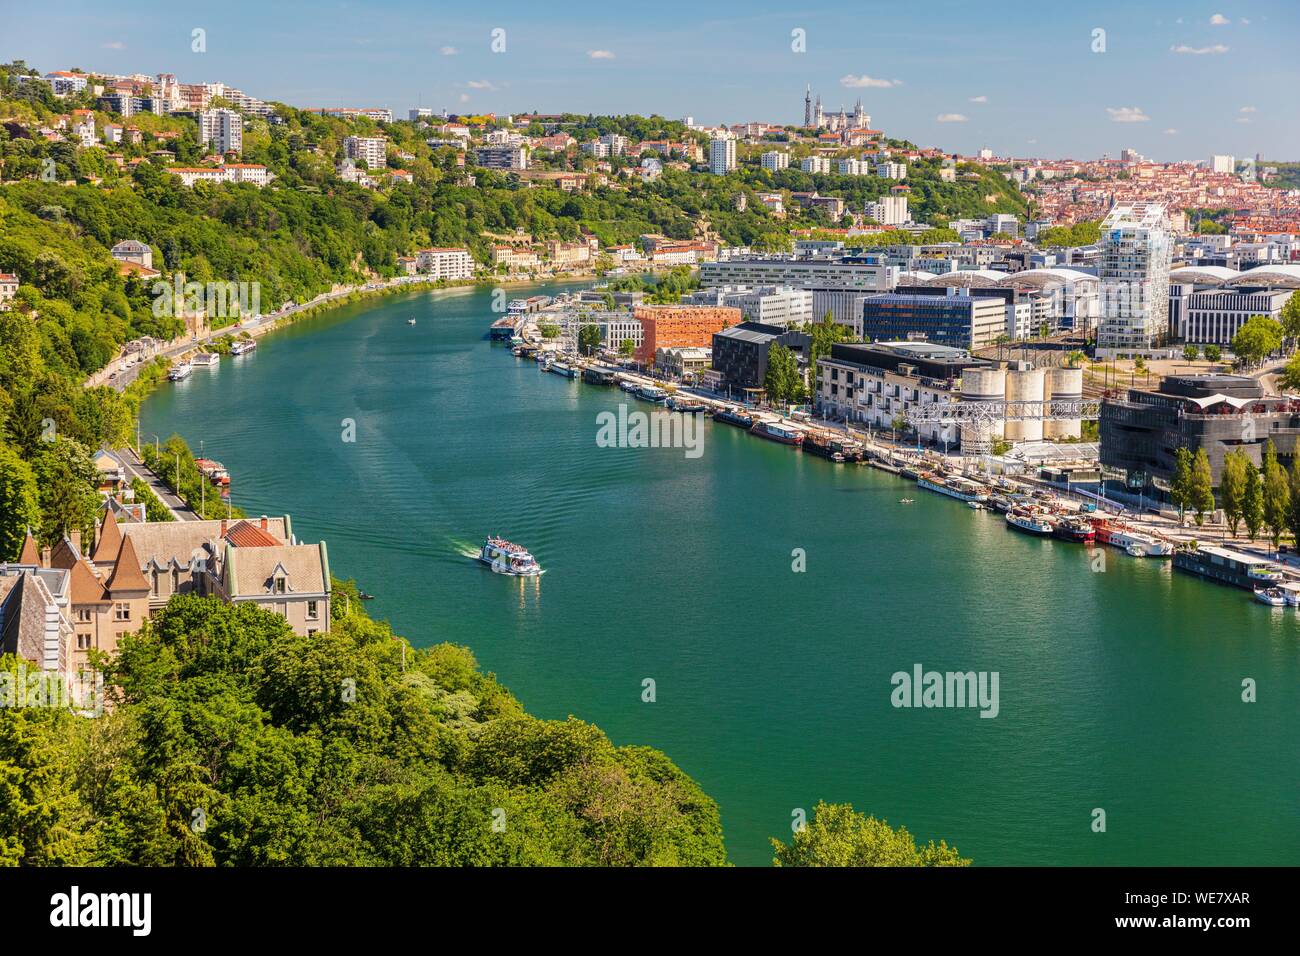 France, Rhône (69), Lyon, district of La Confluence in the south of the peninsula, first French quarter certified sustainable by the WWF, view of the quai Rambaud along the old docks with the Green Cube, the Orange Cube, the Ycone tower and Notre Dame de Fourviere Basilica Stock Photo